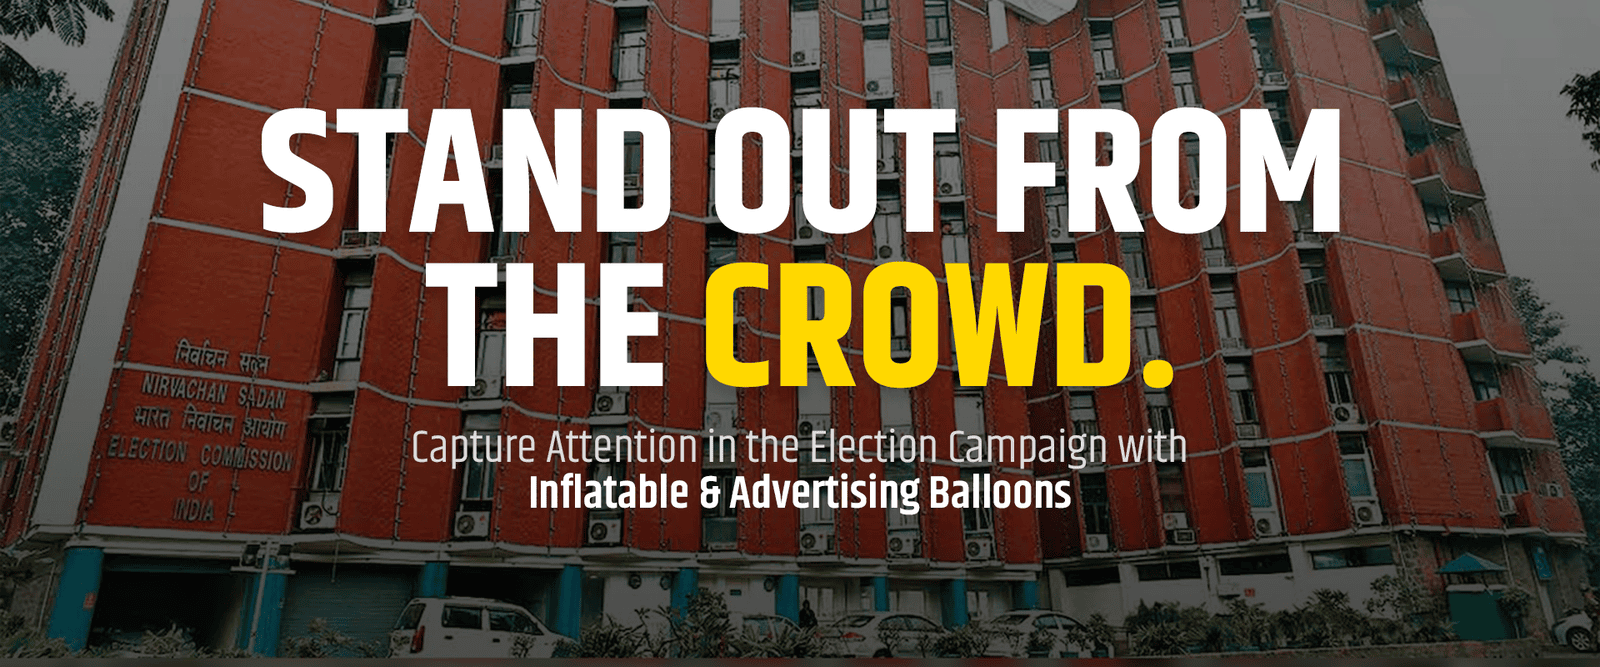 Capture Attention in the Election Campaign with Inflatable Advertising Balloons